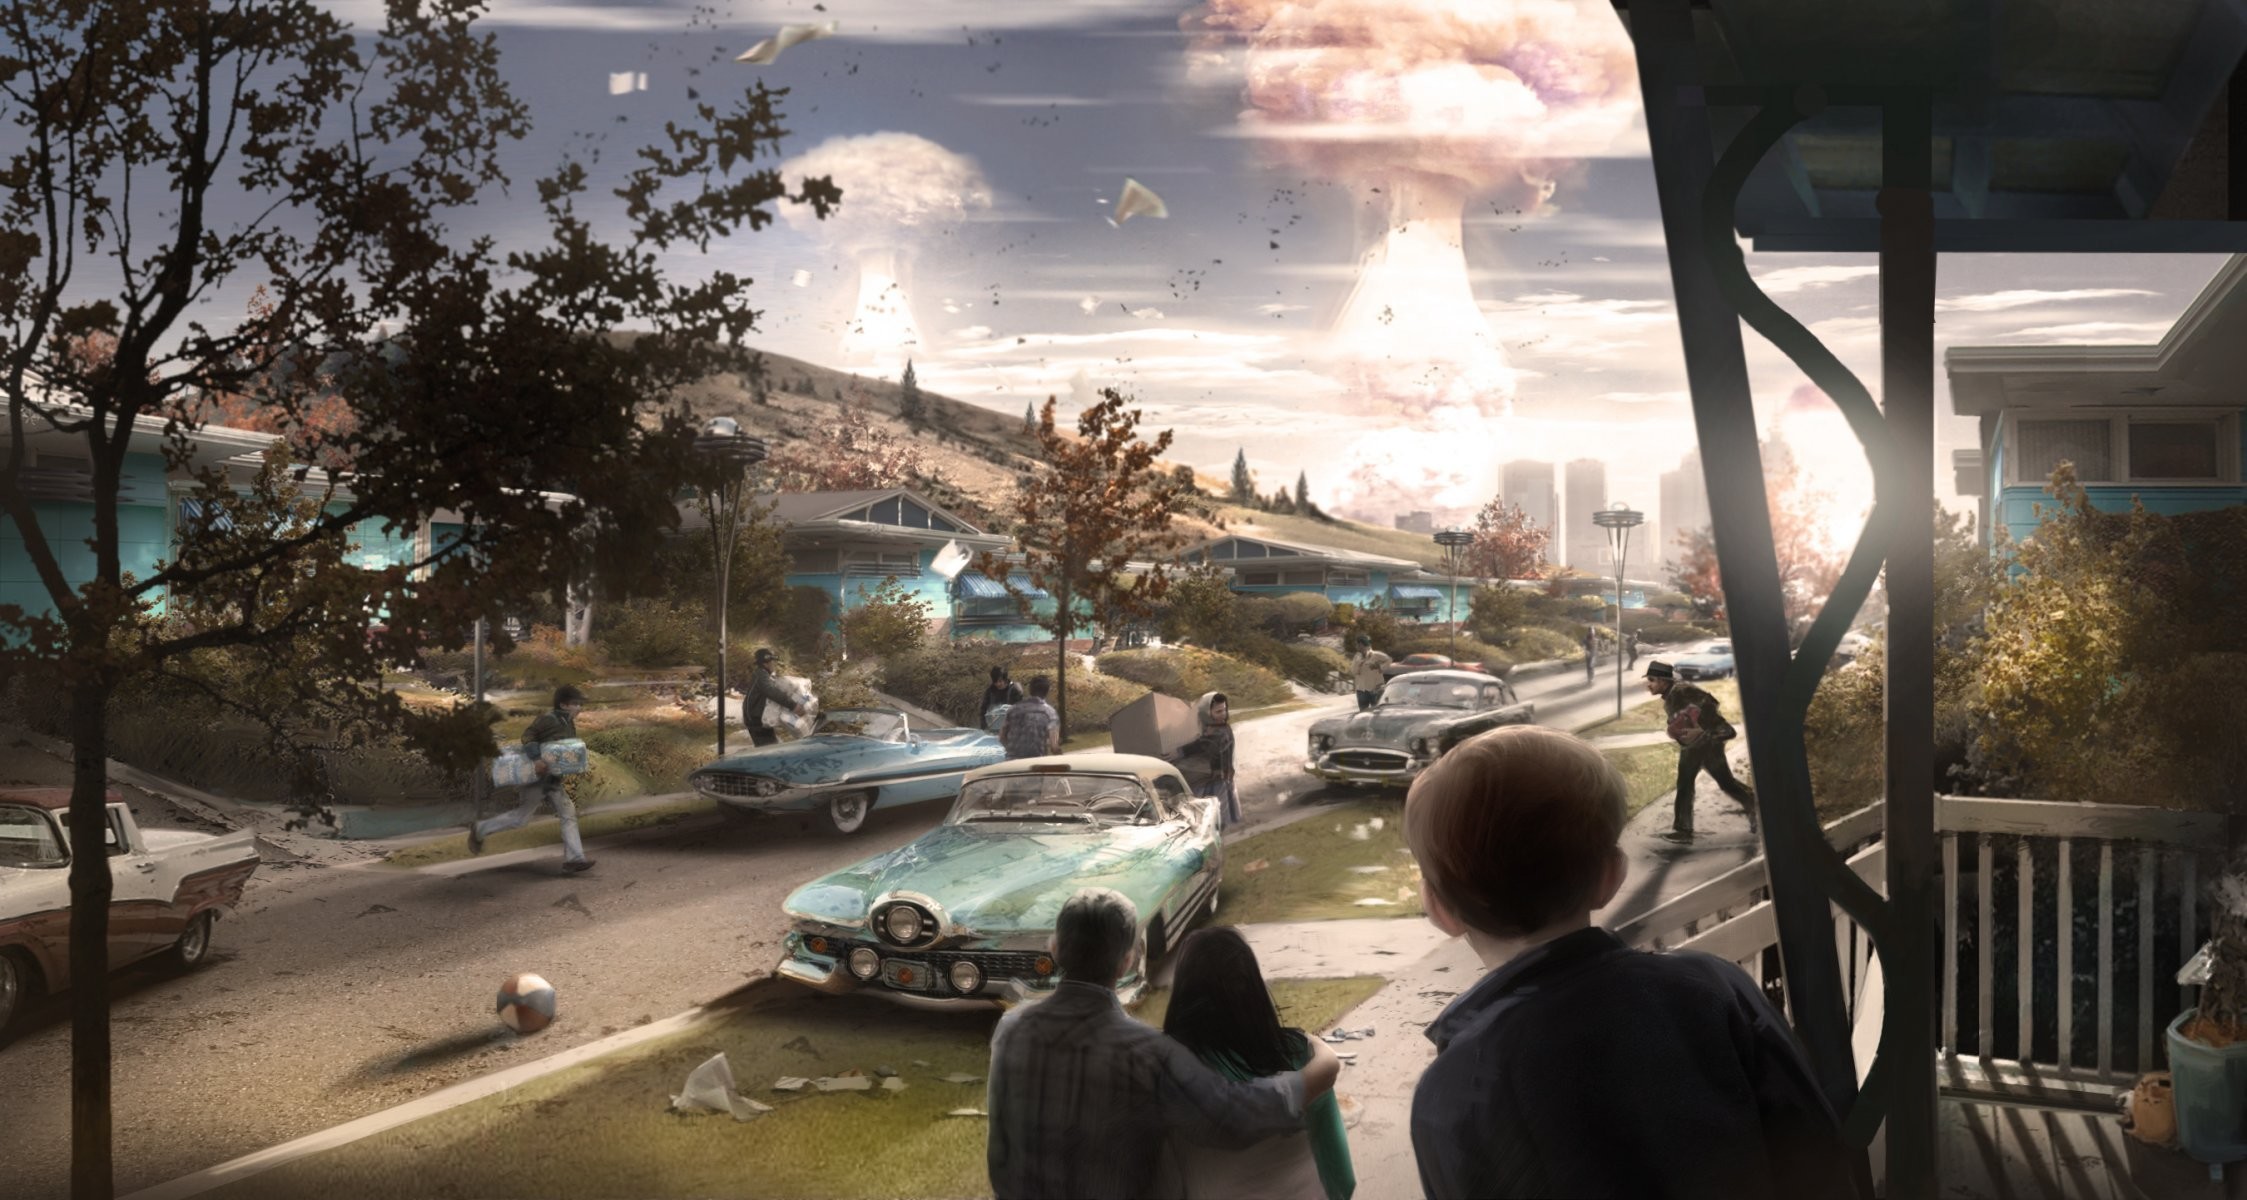 Nuclear explosion explosion town street house machinery people panic fallout 4 concept fallout concept art bethesda